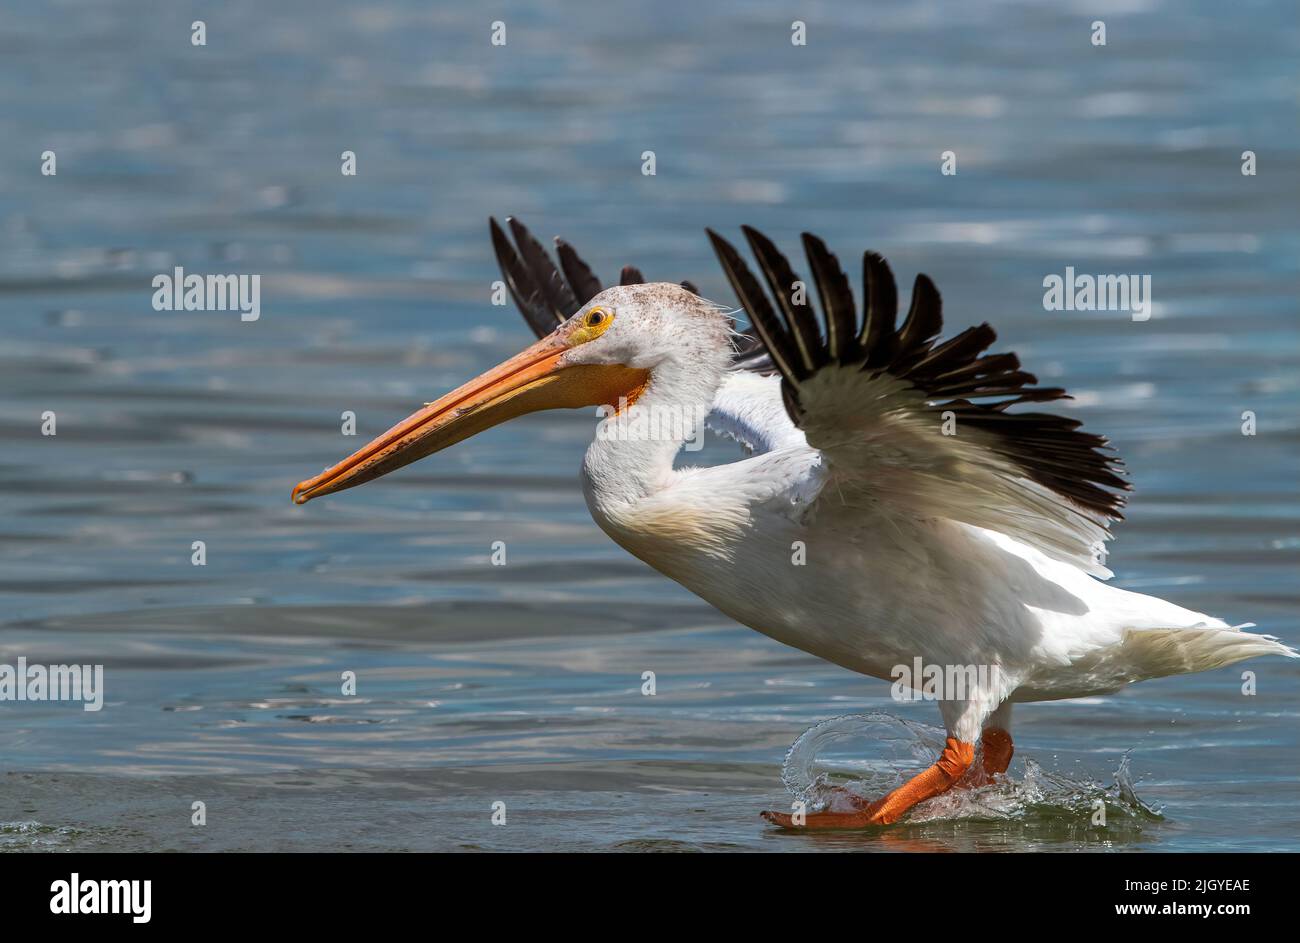 Closeup of an American White Pelican skidding on the water just after landing. Stock Photo